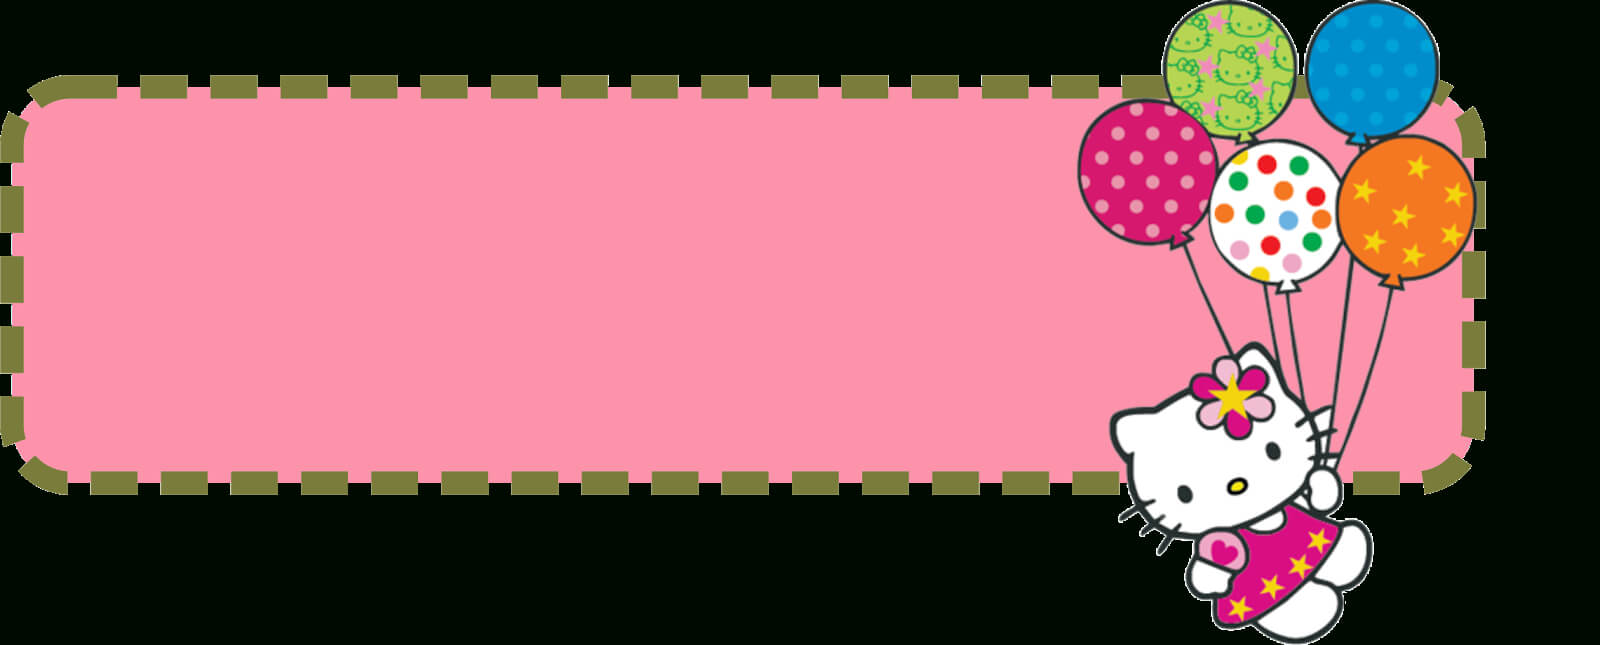 Hello Kitty Banner Template In Hello Kitty Banner Template